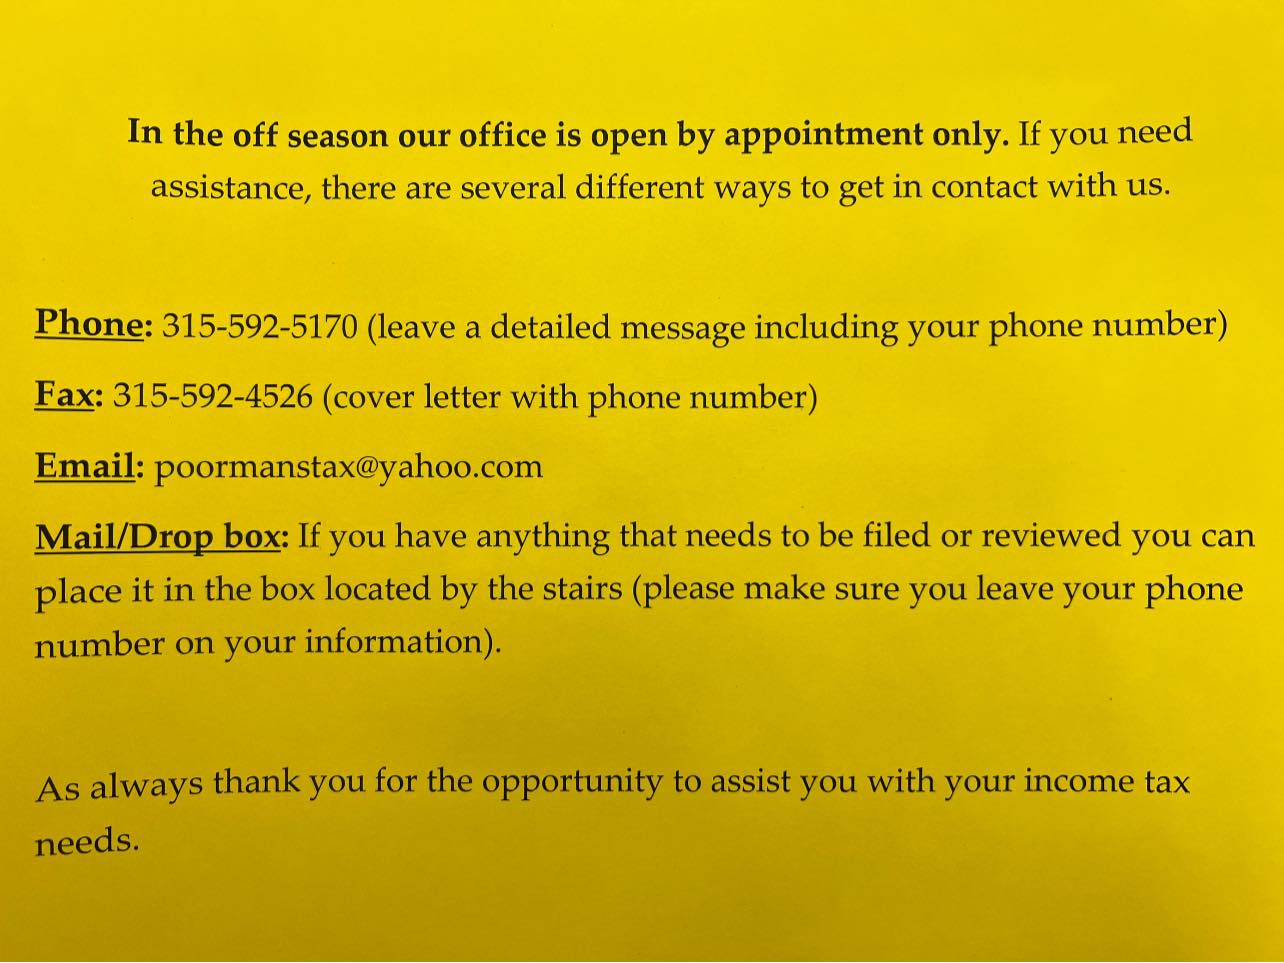 Poorman's Tax Services 201 S 1st St, Fulton New York 13069